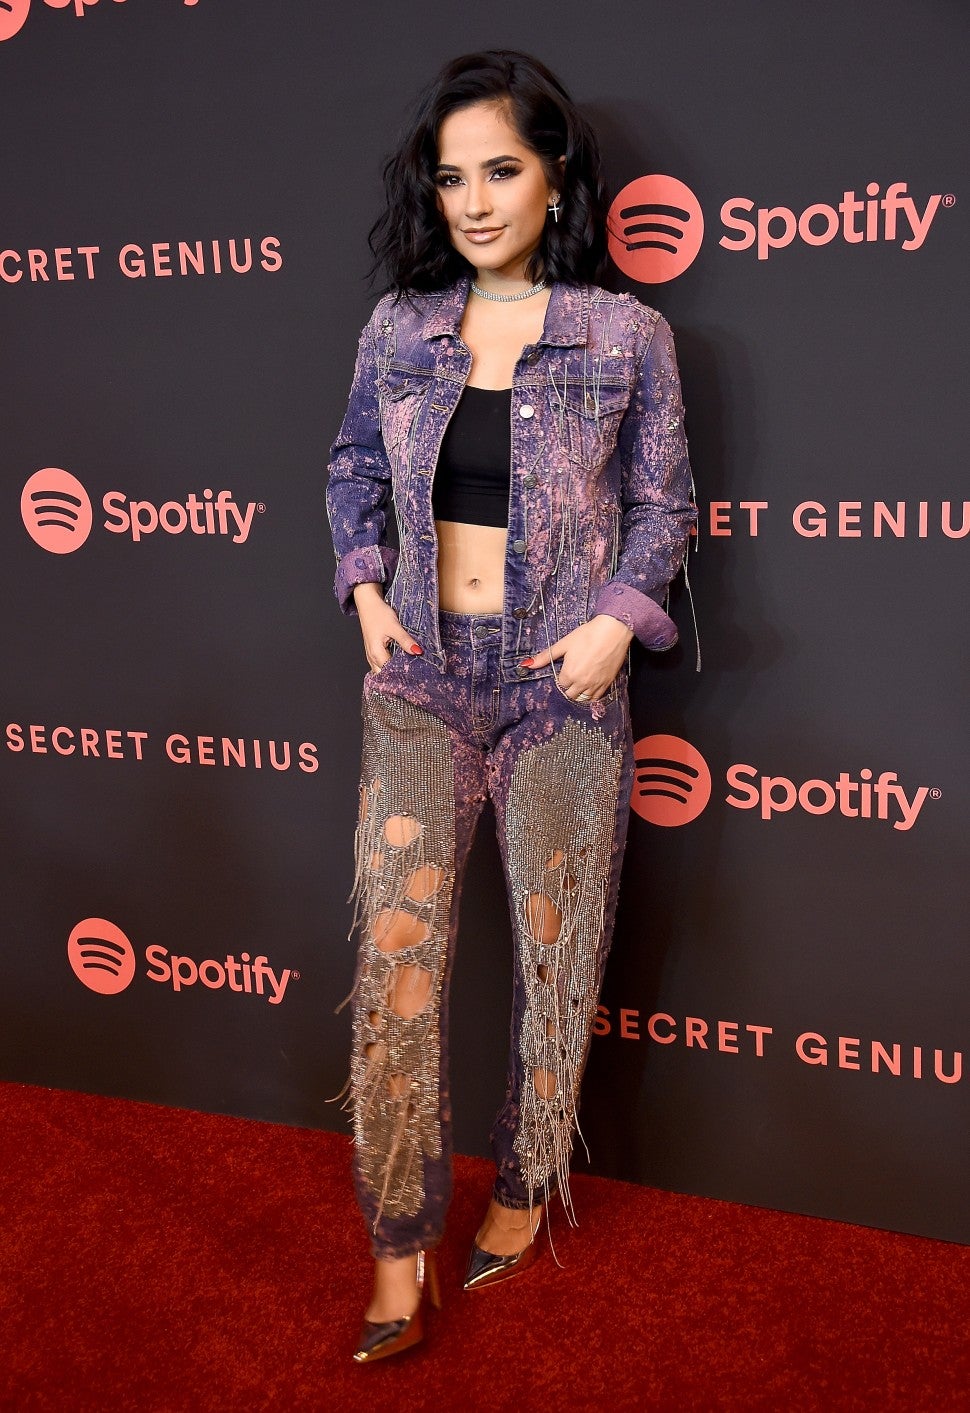 becky_g_gettyimages-1062721310.jpg 